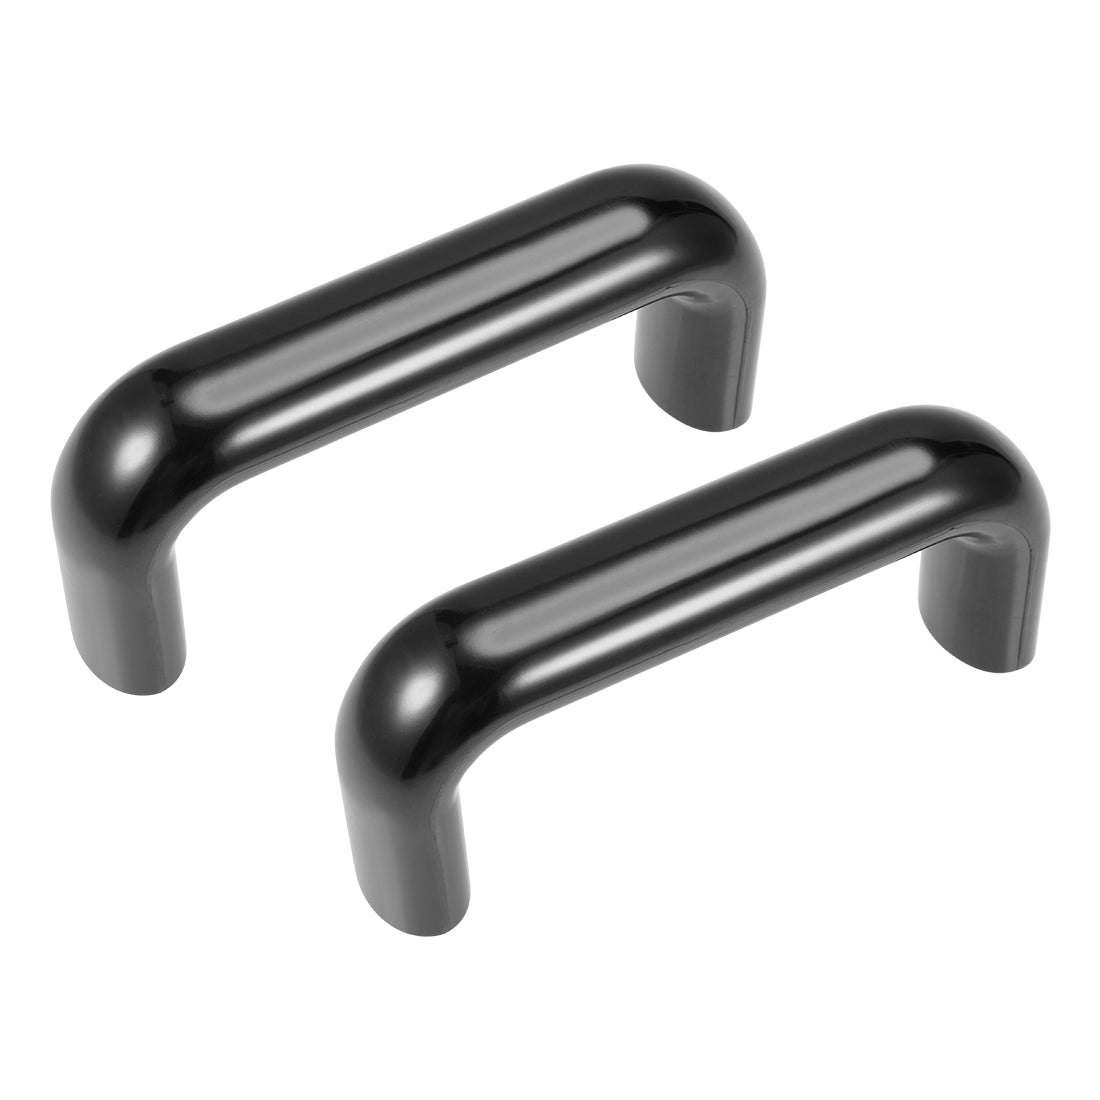 uxcell Uxcell Bakelite Pulls Handles 120mm Hole Centers Black for Industrial Machine 2Pcs